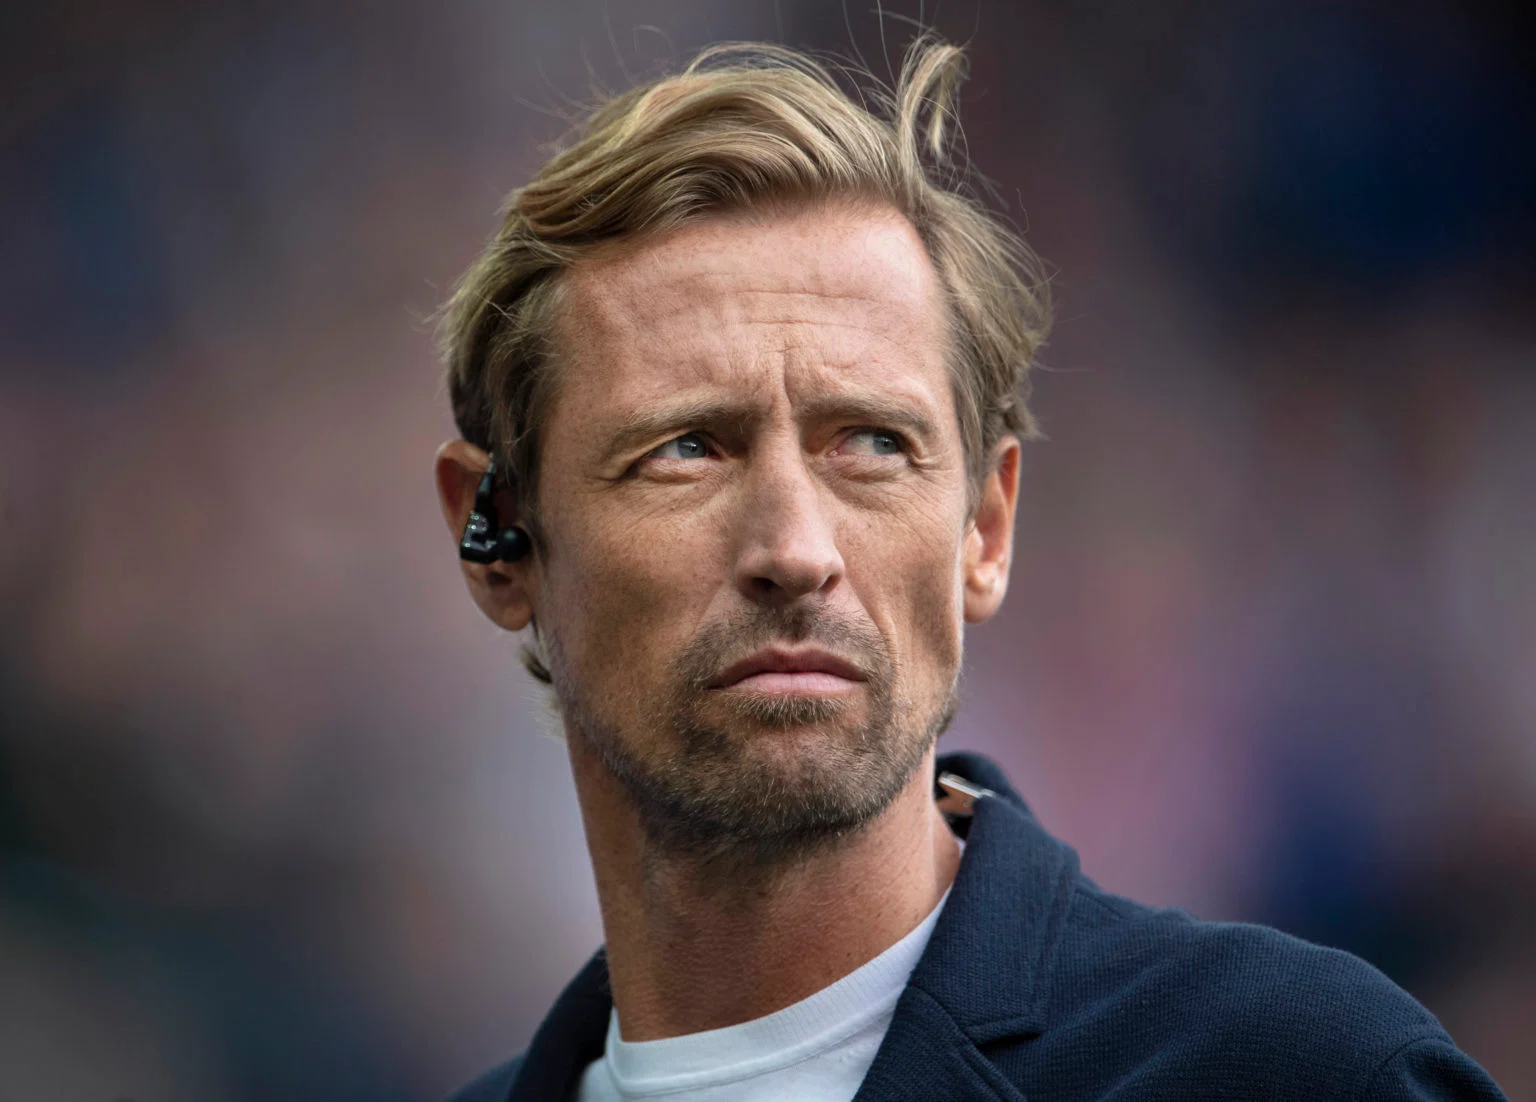 Peter Crouch Criticizes Postponement Of EPL Matches Over Queen's Death